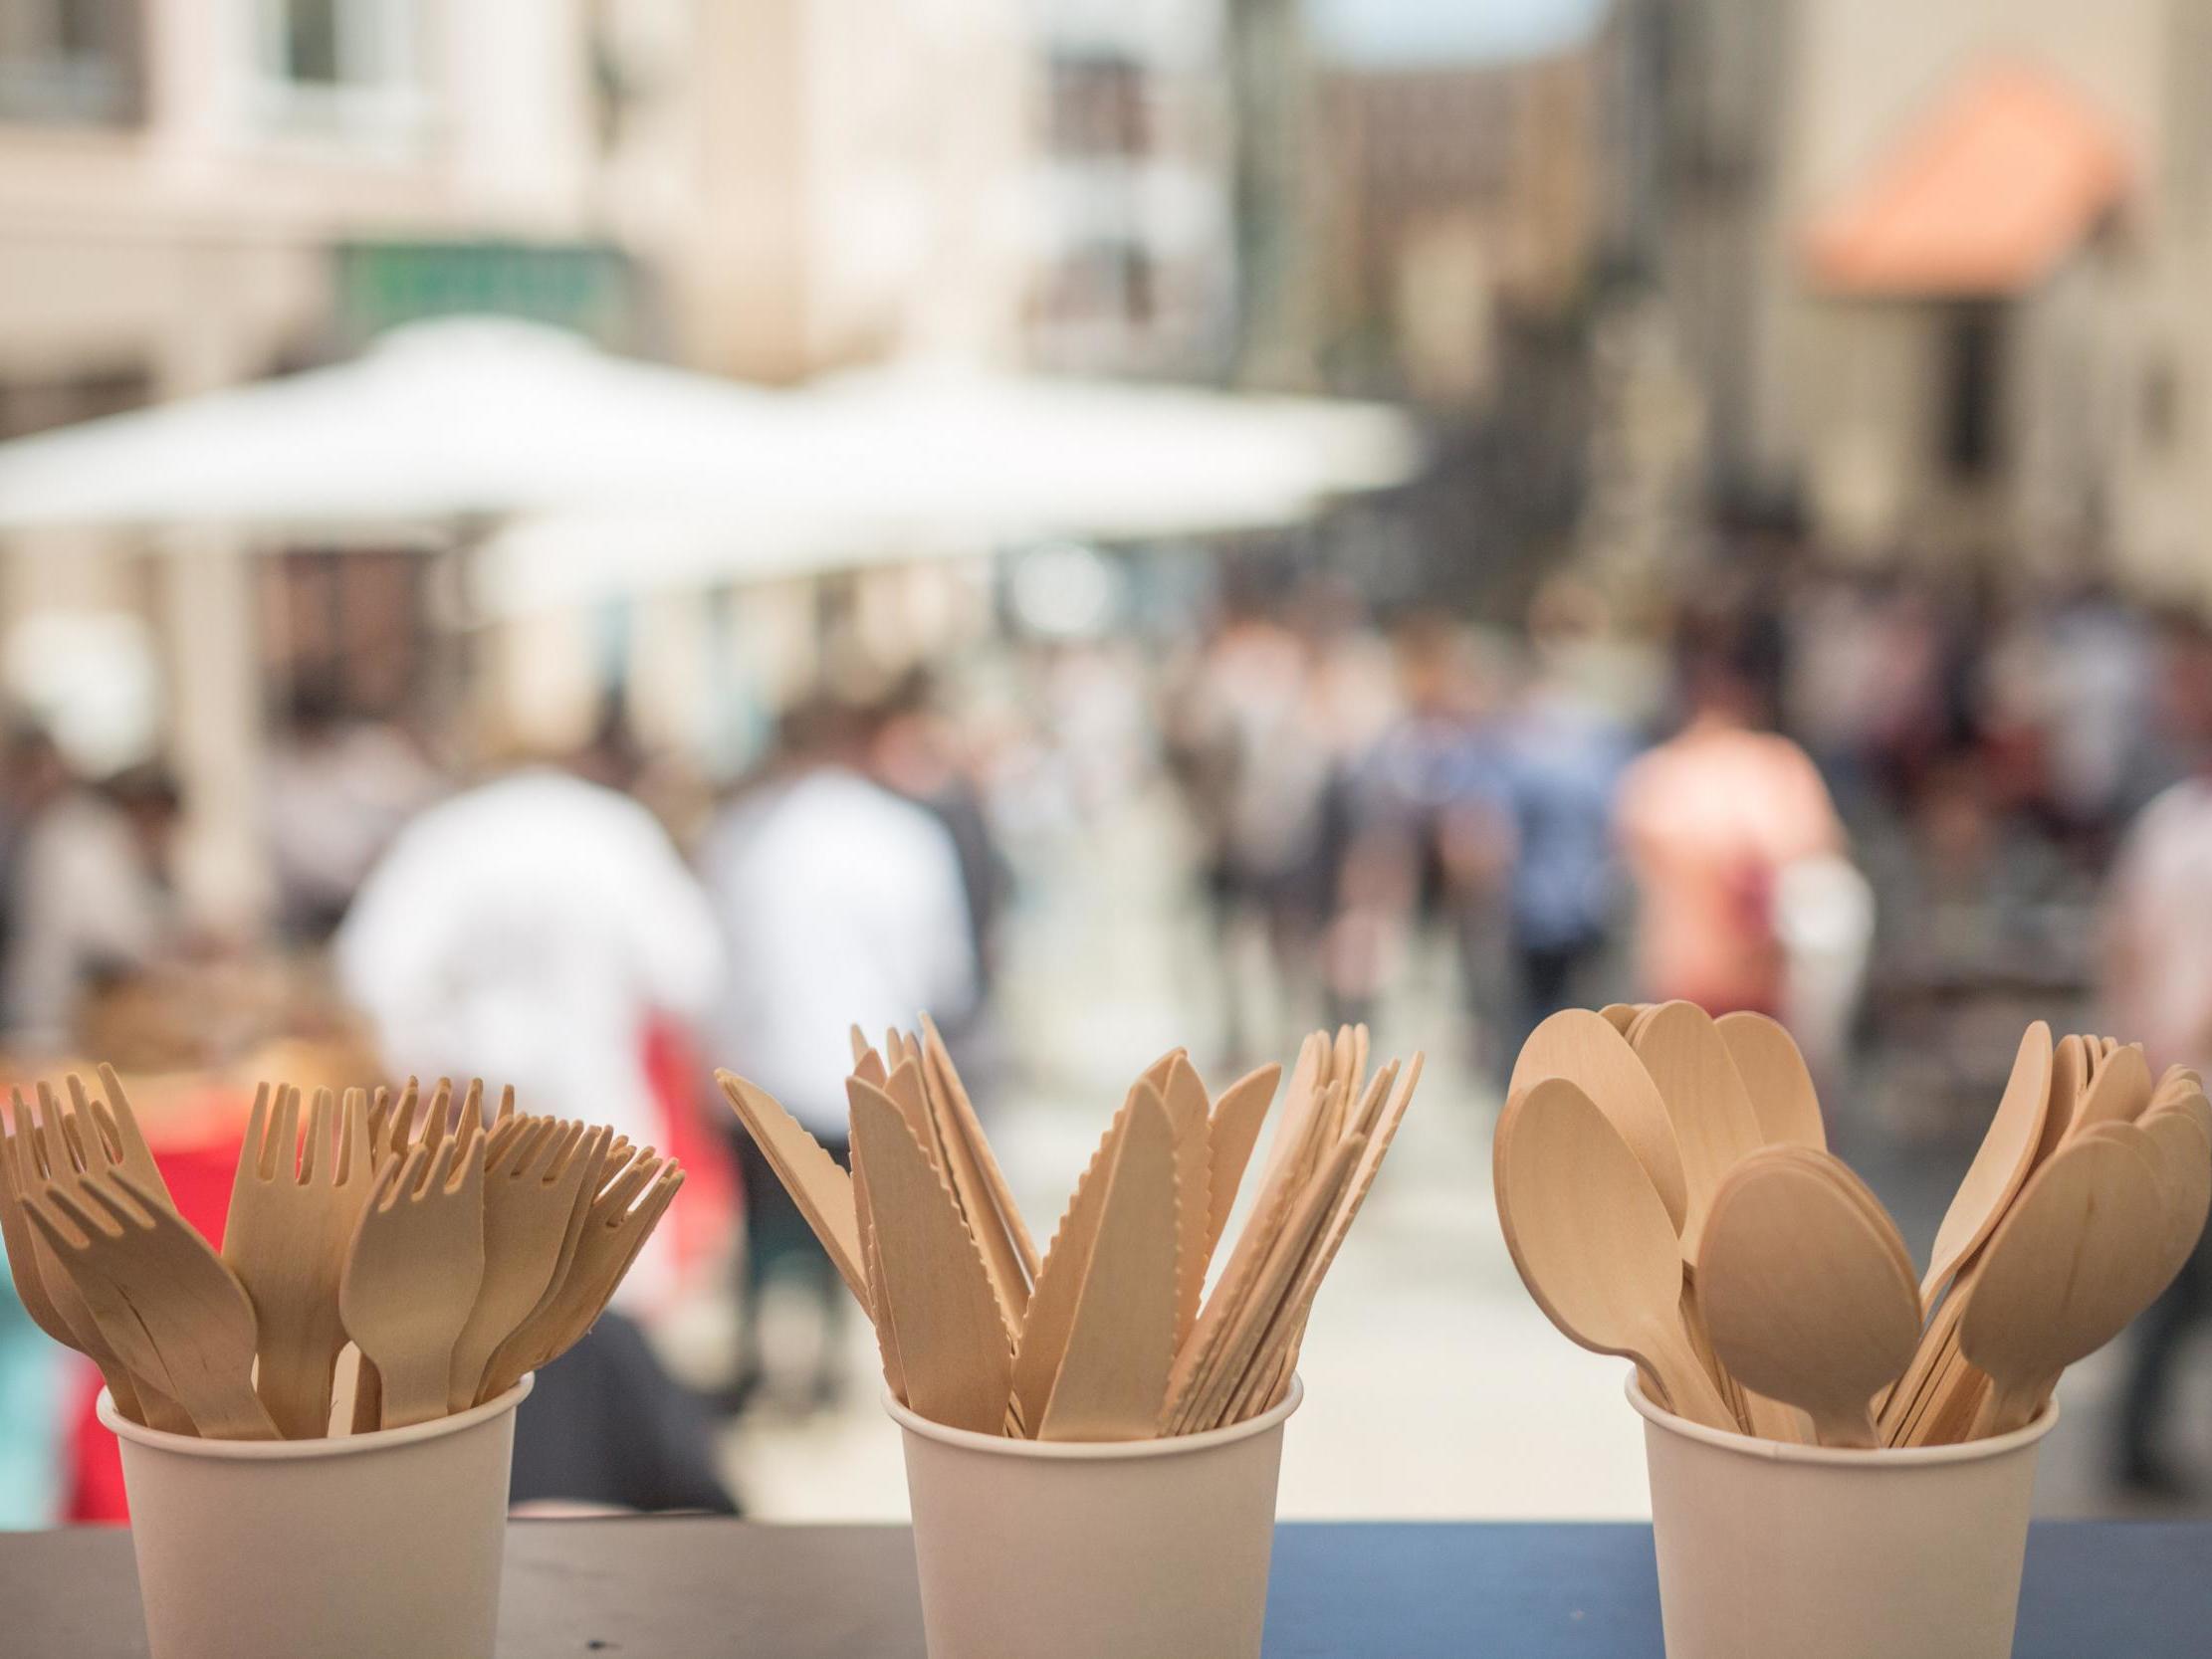 Wooden cutlery may be even worse for the environment than some plastics, the report says